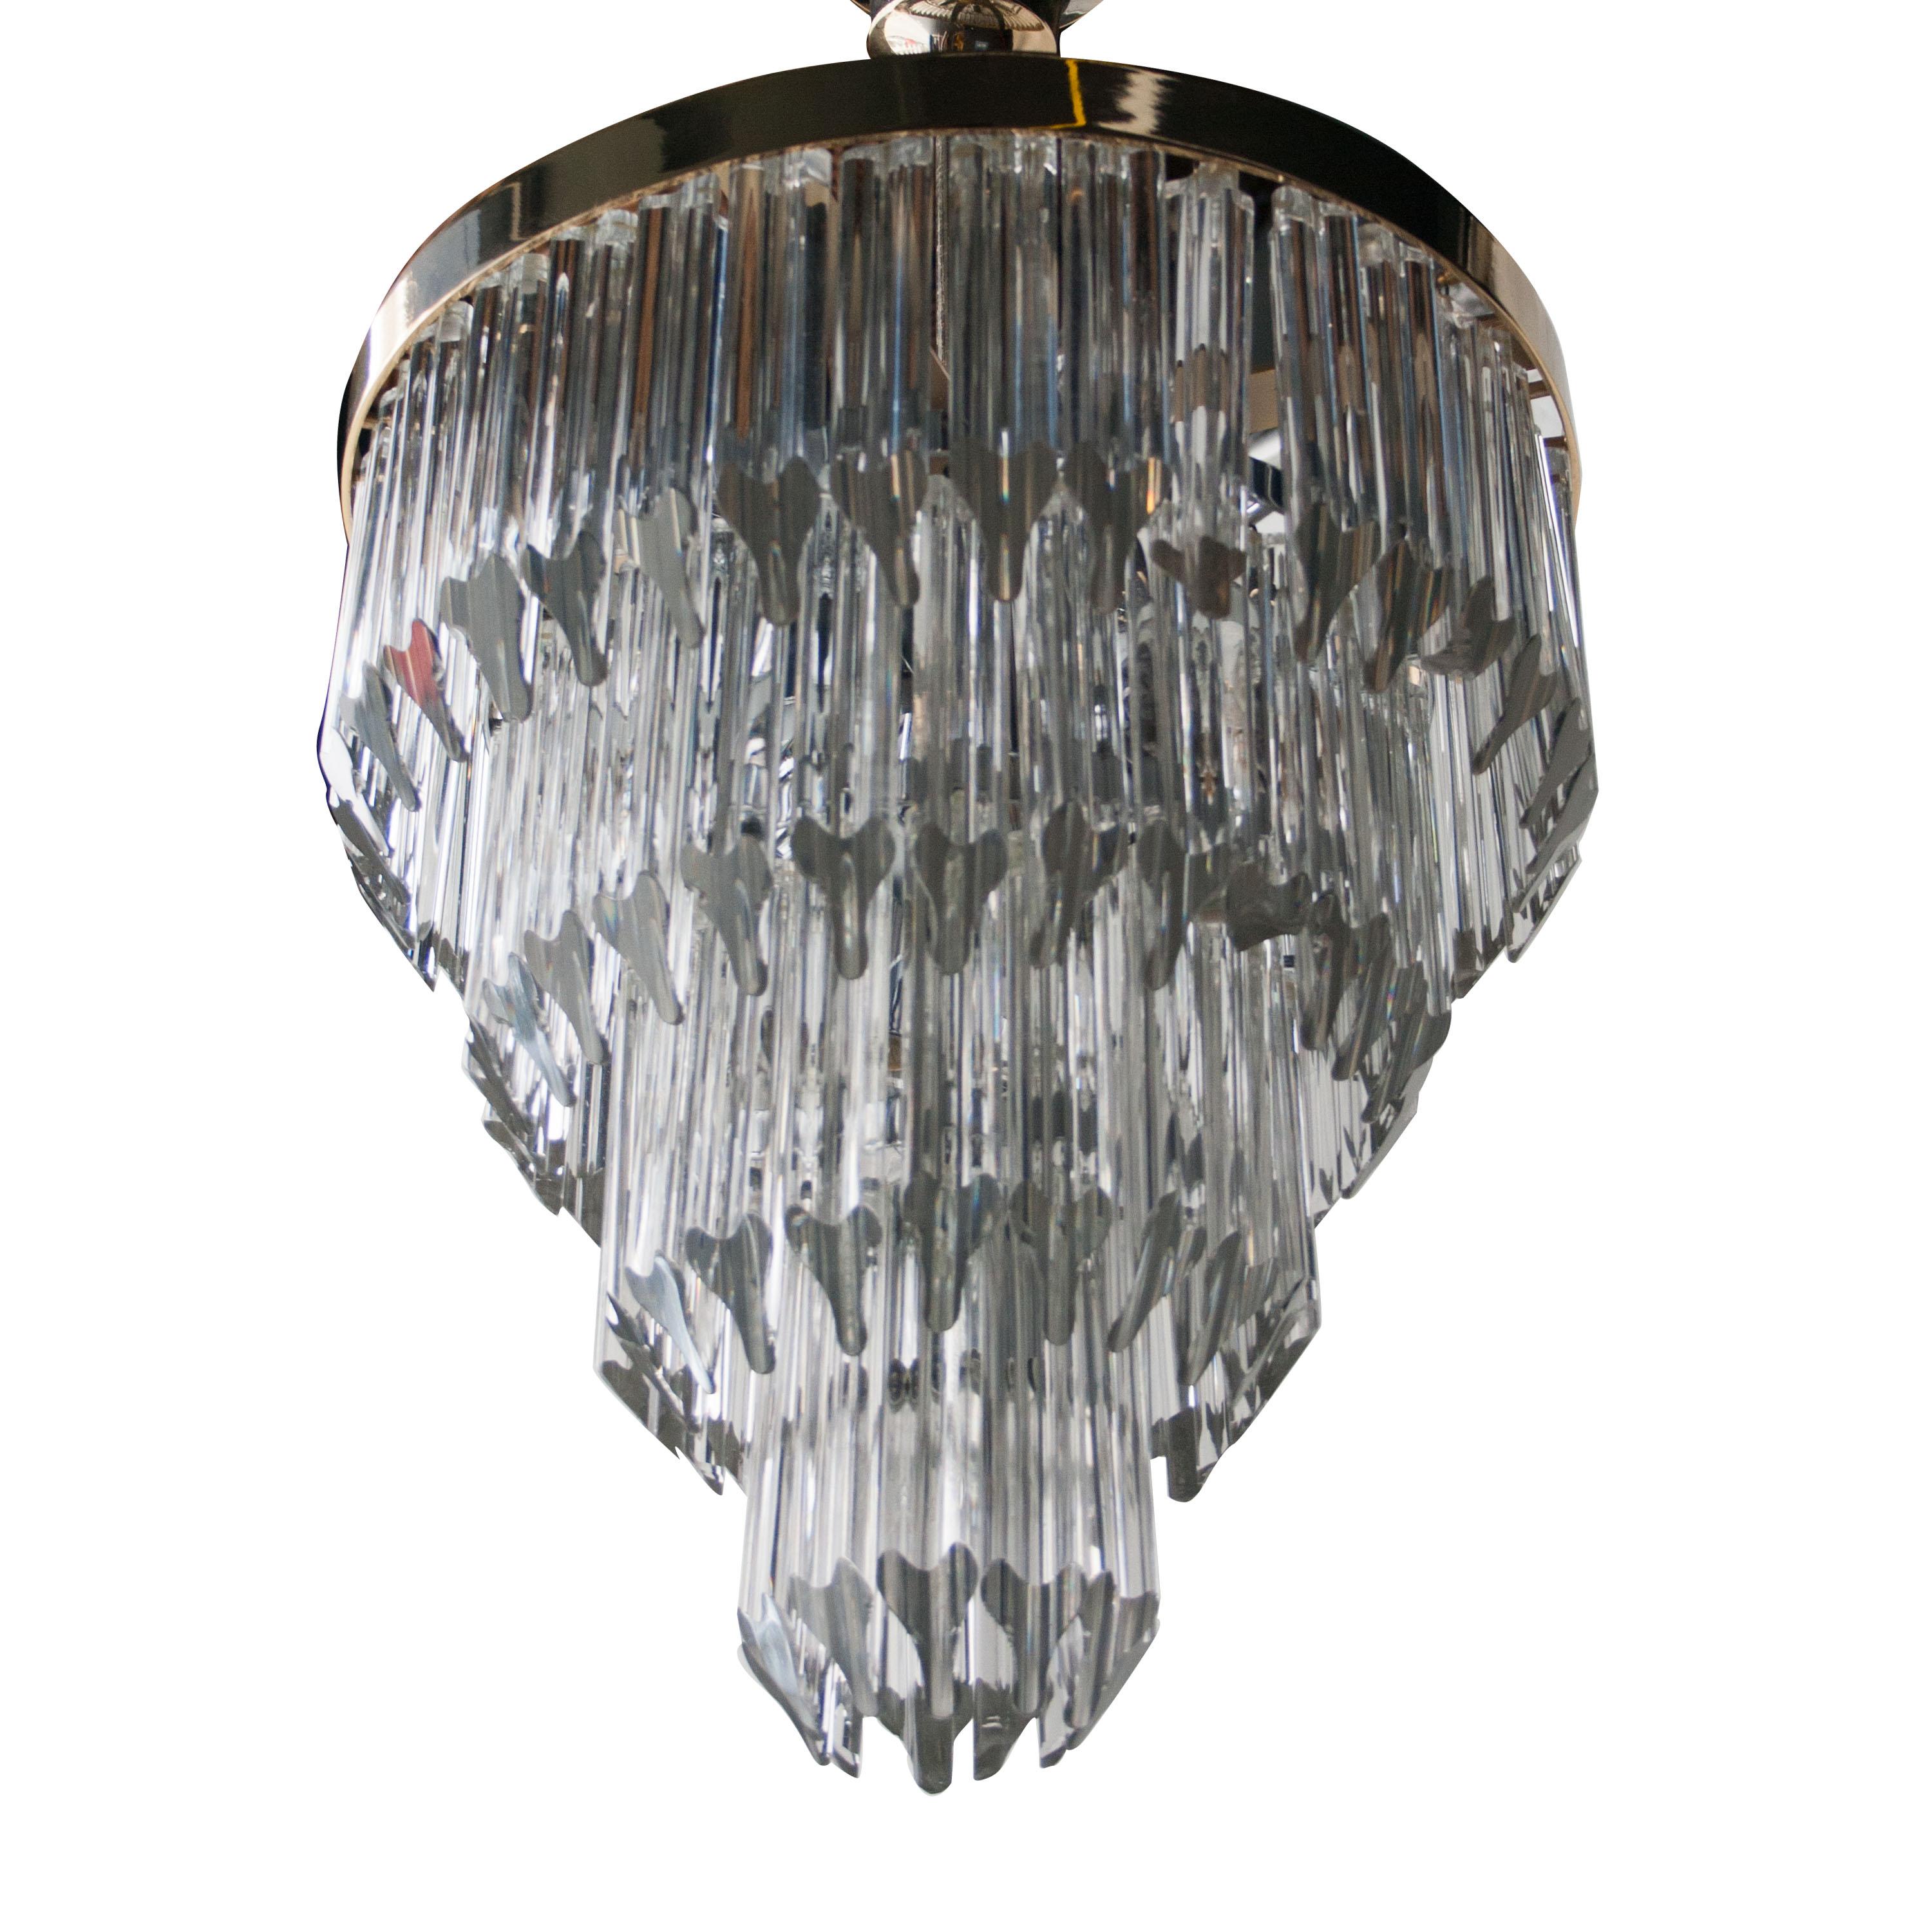 1970s Italian circled chandelier by composed of clear, multi-tiered, tubal pieces glass.